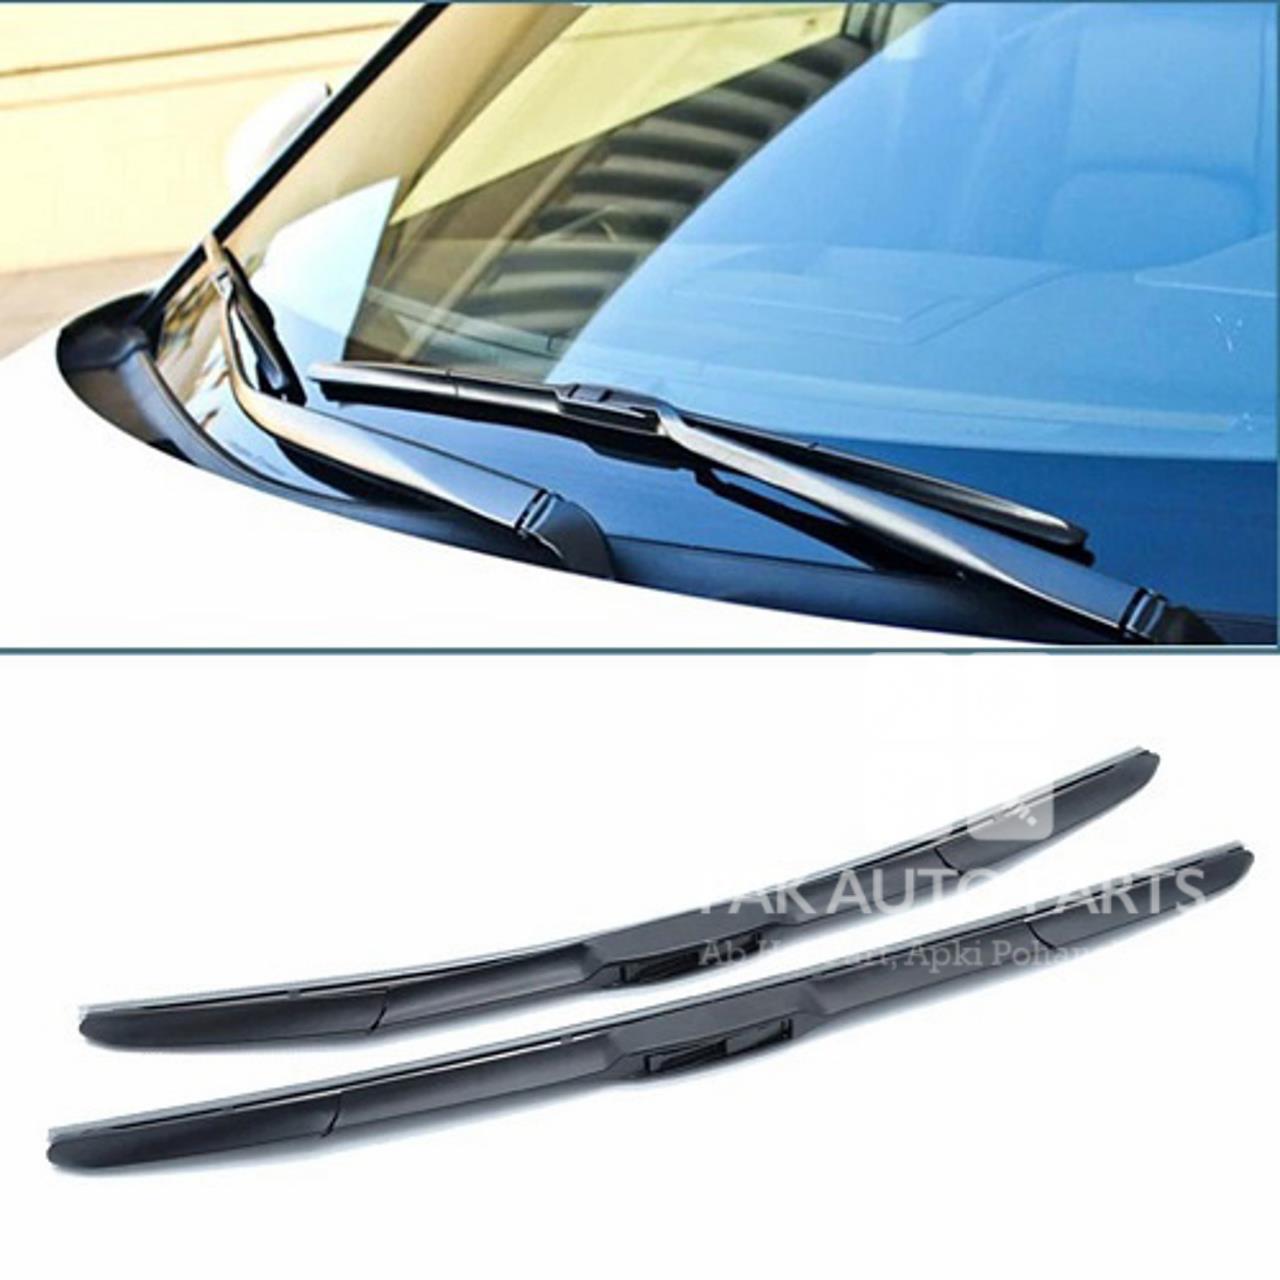 Picture of New Hyundai Elantra| Hybrid Wiper Blades | Non-Scratch able | Black Lead Coated Rubber.